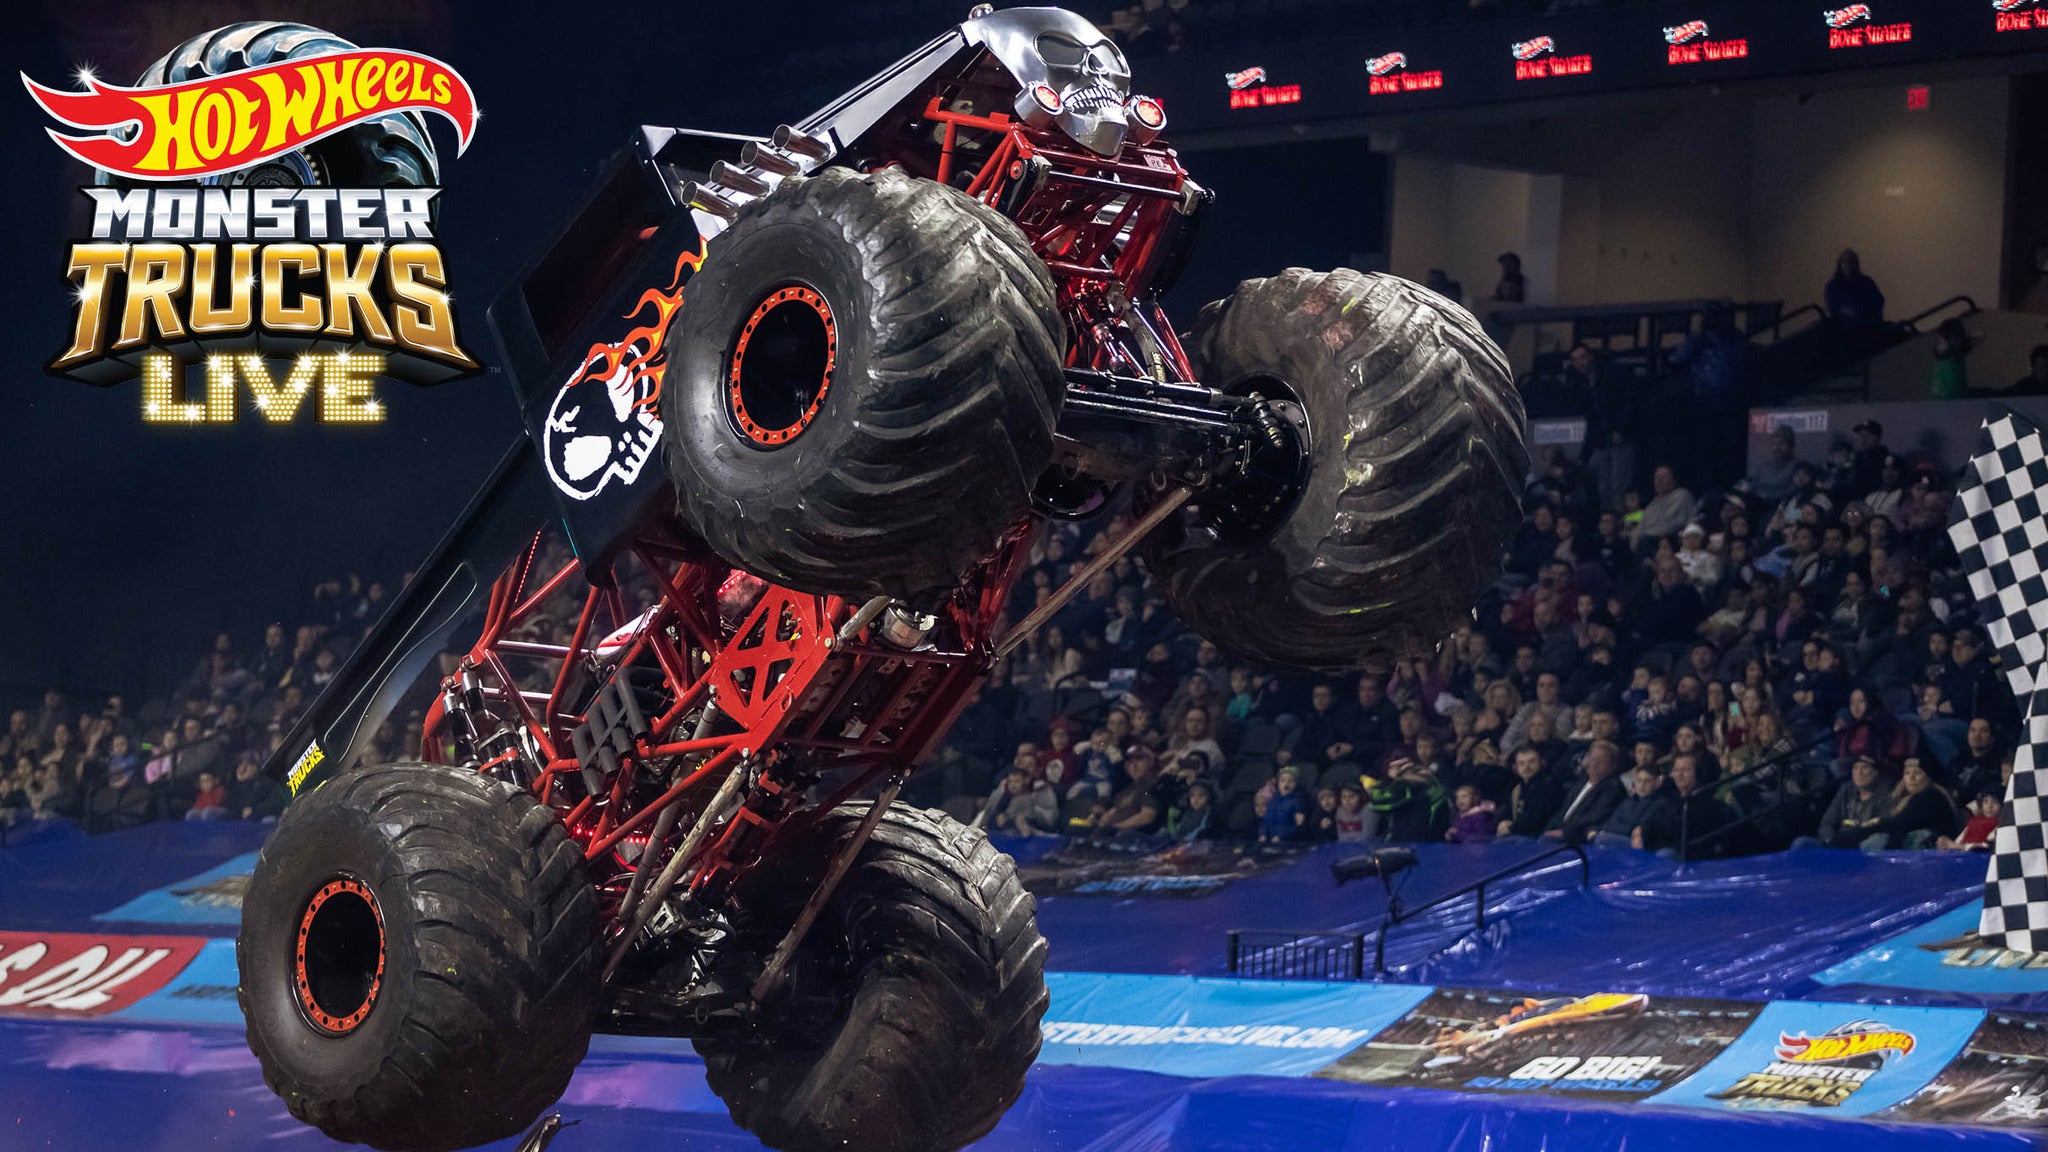 Hot Wheels Monster Trucks Live in Fort Worth promo photo for Previous Buyer presale offer code